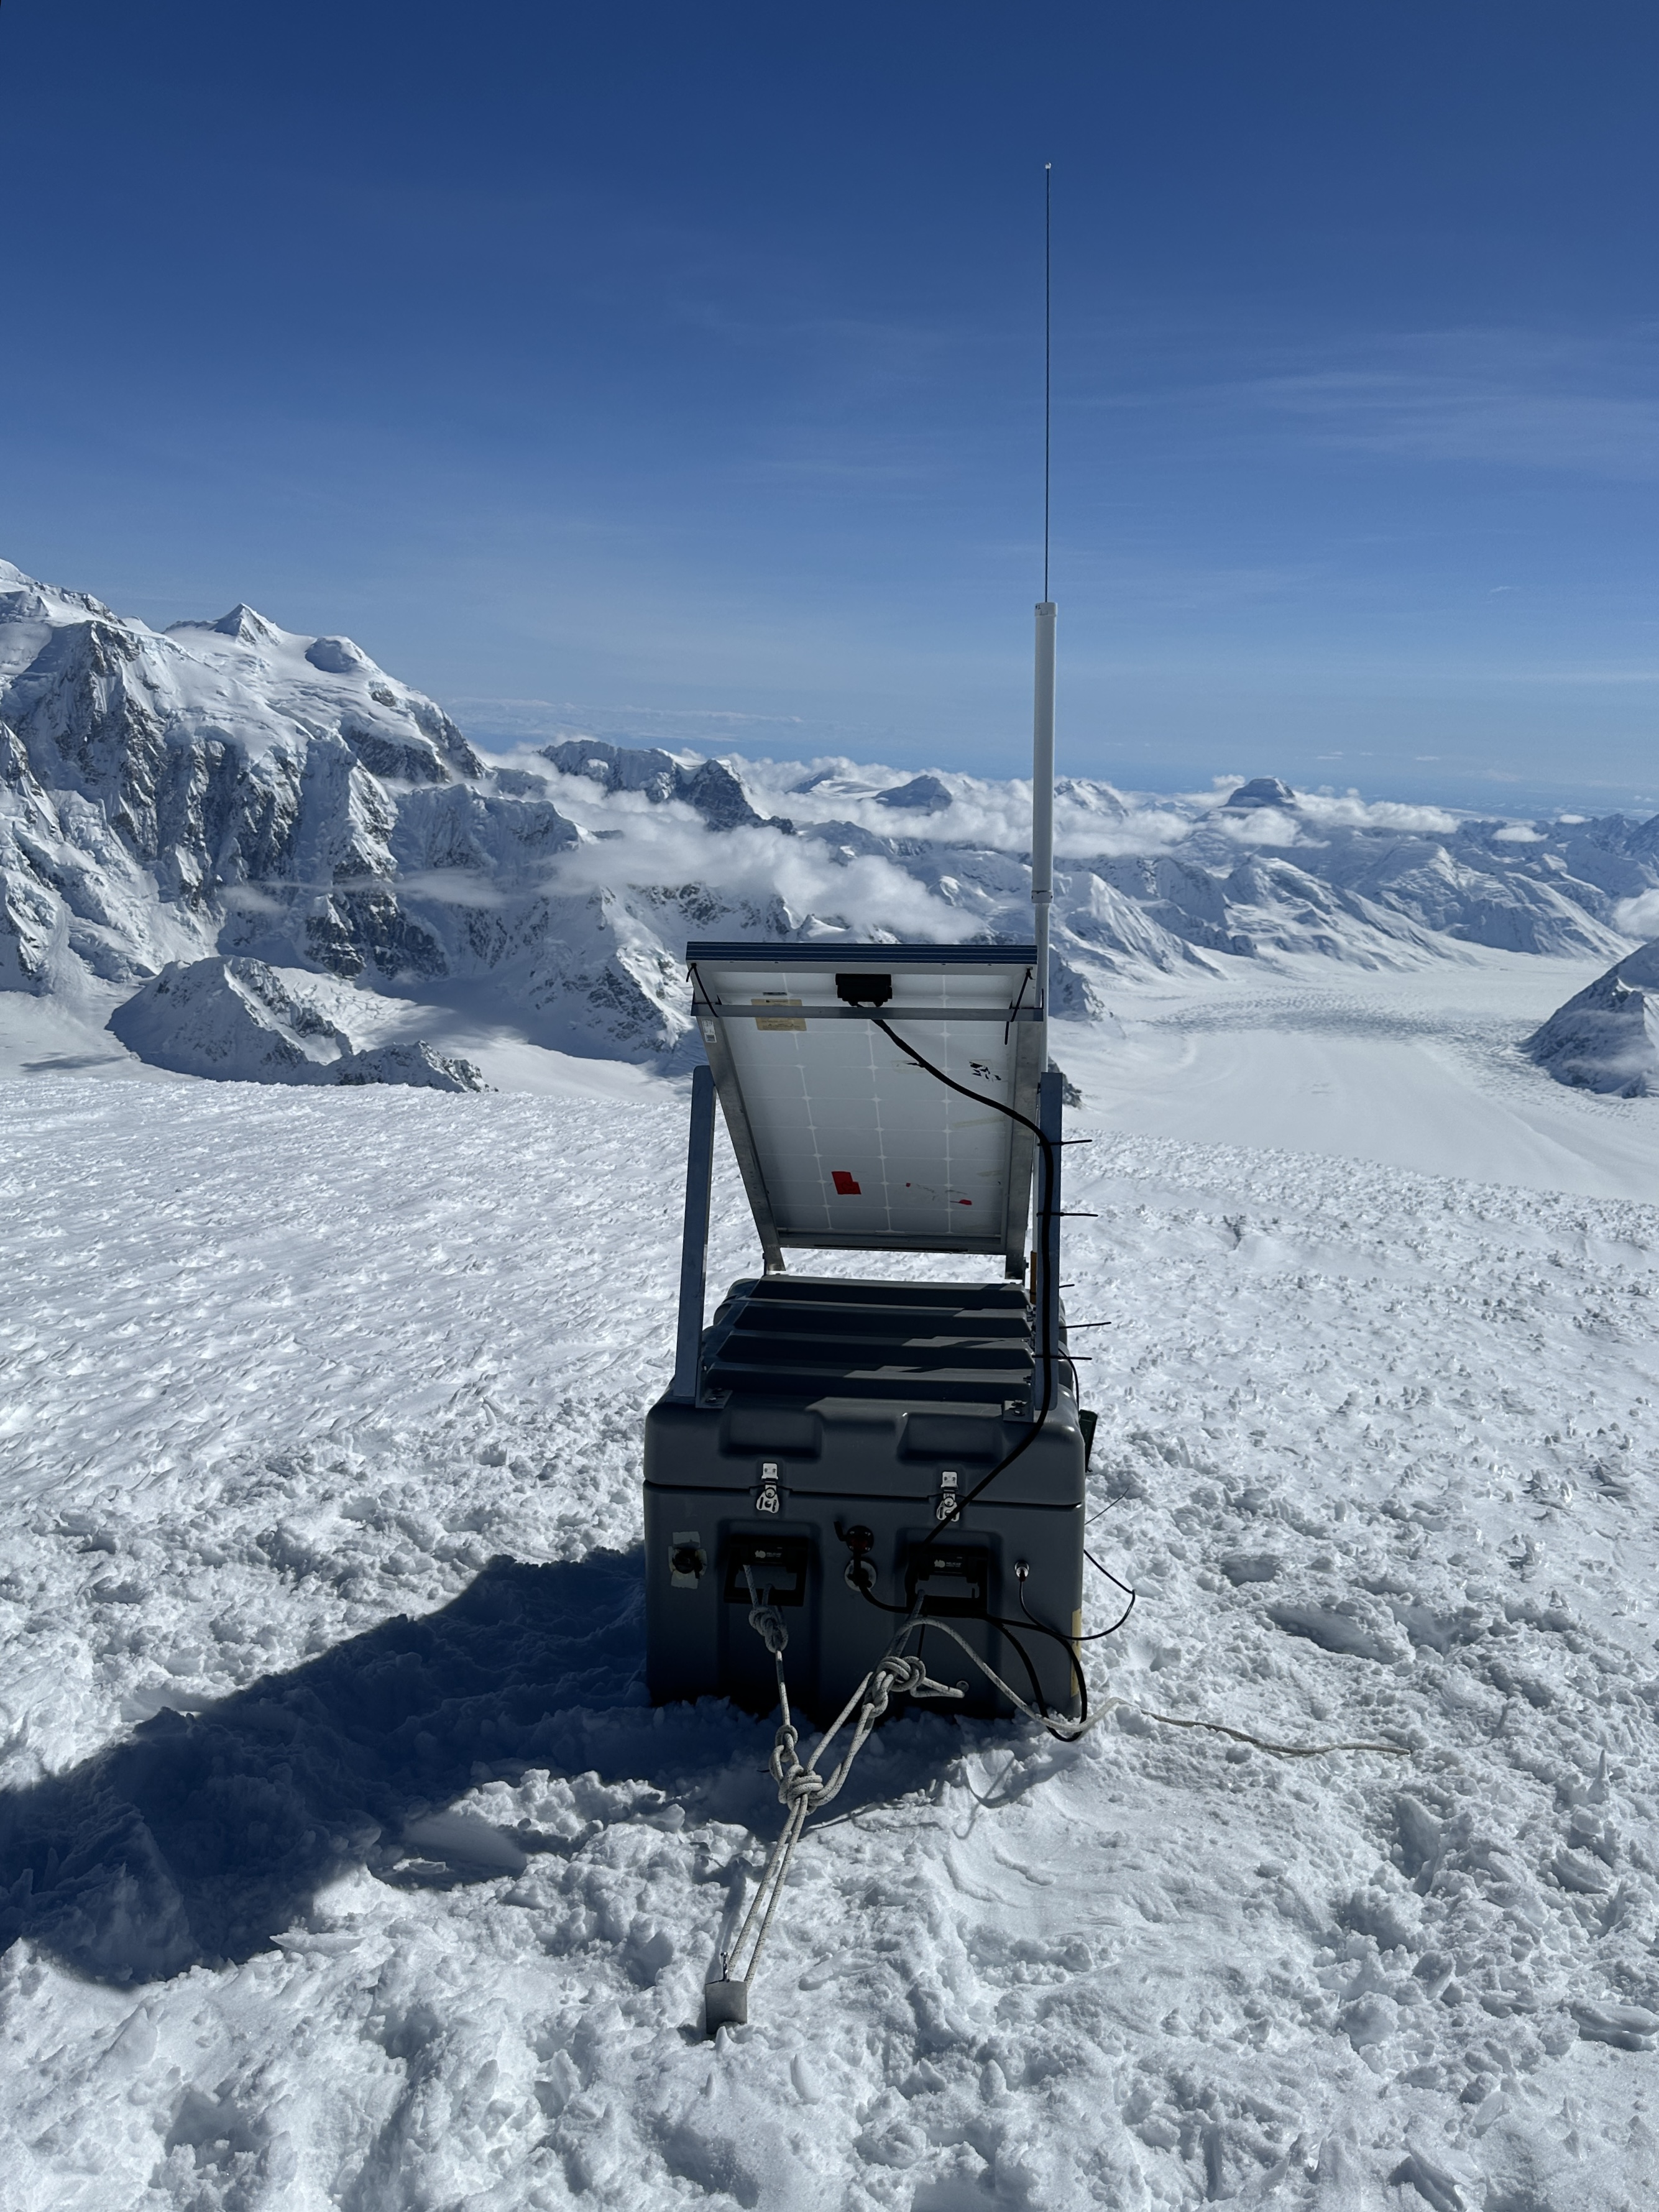 A big black box with a solar panel and antenna is sectured to a snow field with ropes